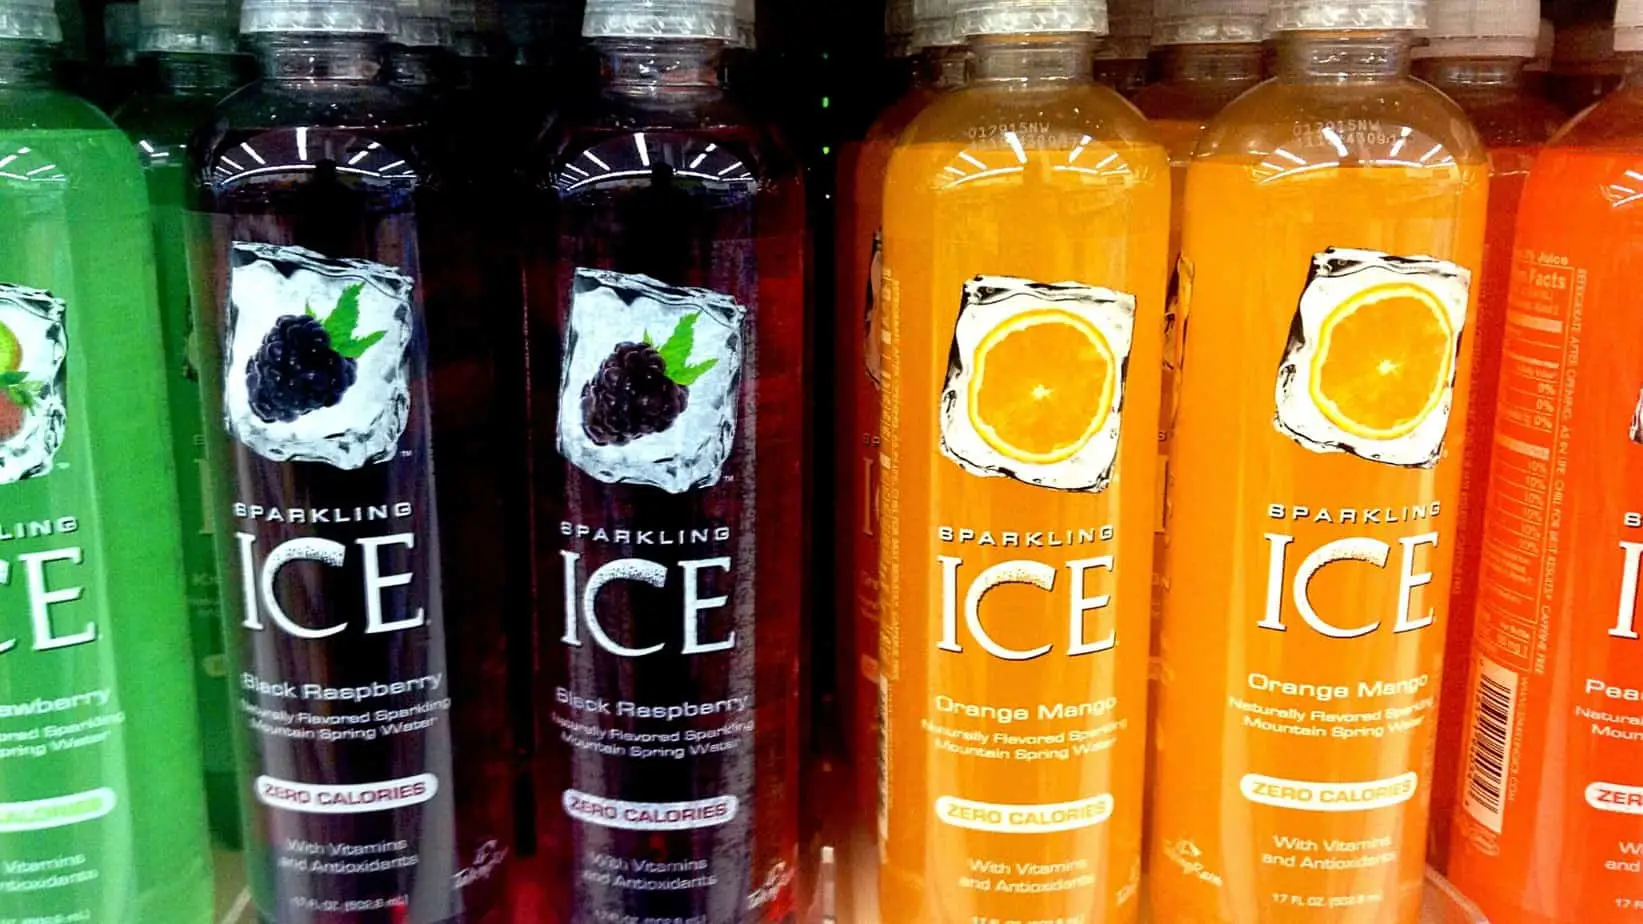 Do Sparkling Ice Drinks Cause Cancer? 